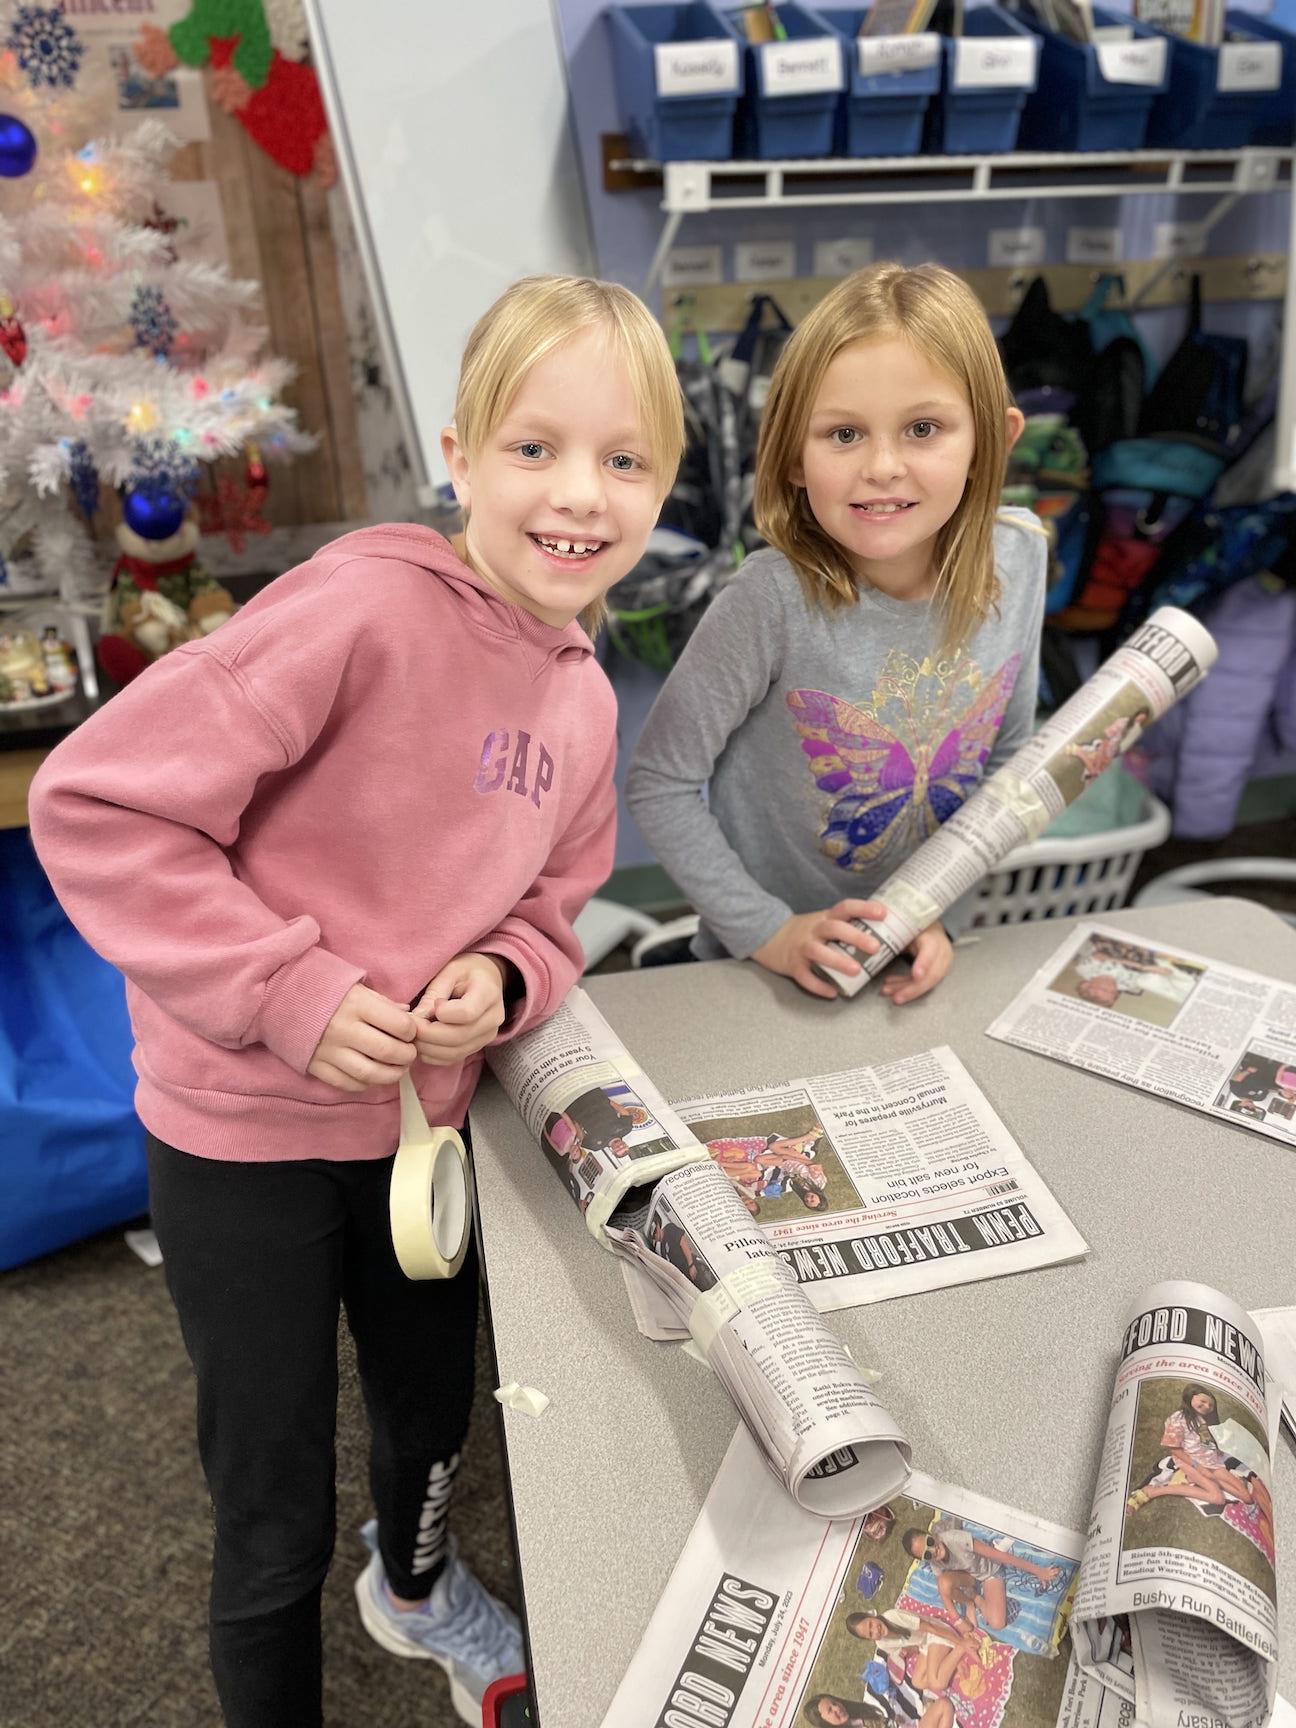 2nd-graders Kassidy Savering and Juna Rodgers tackled the challenge as a team